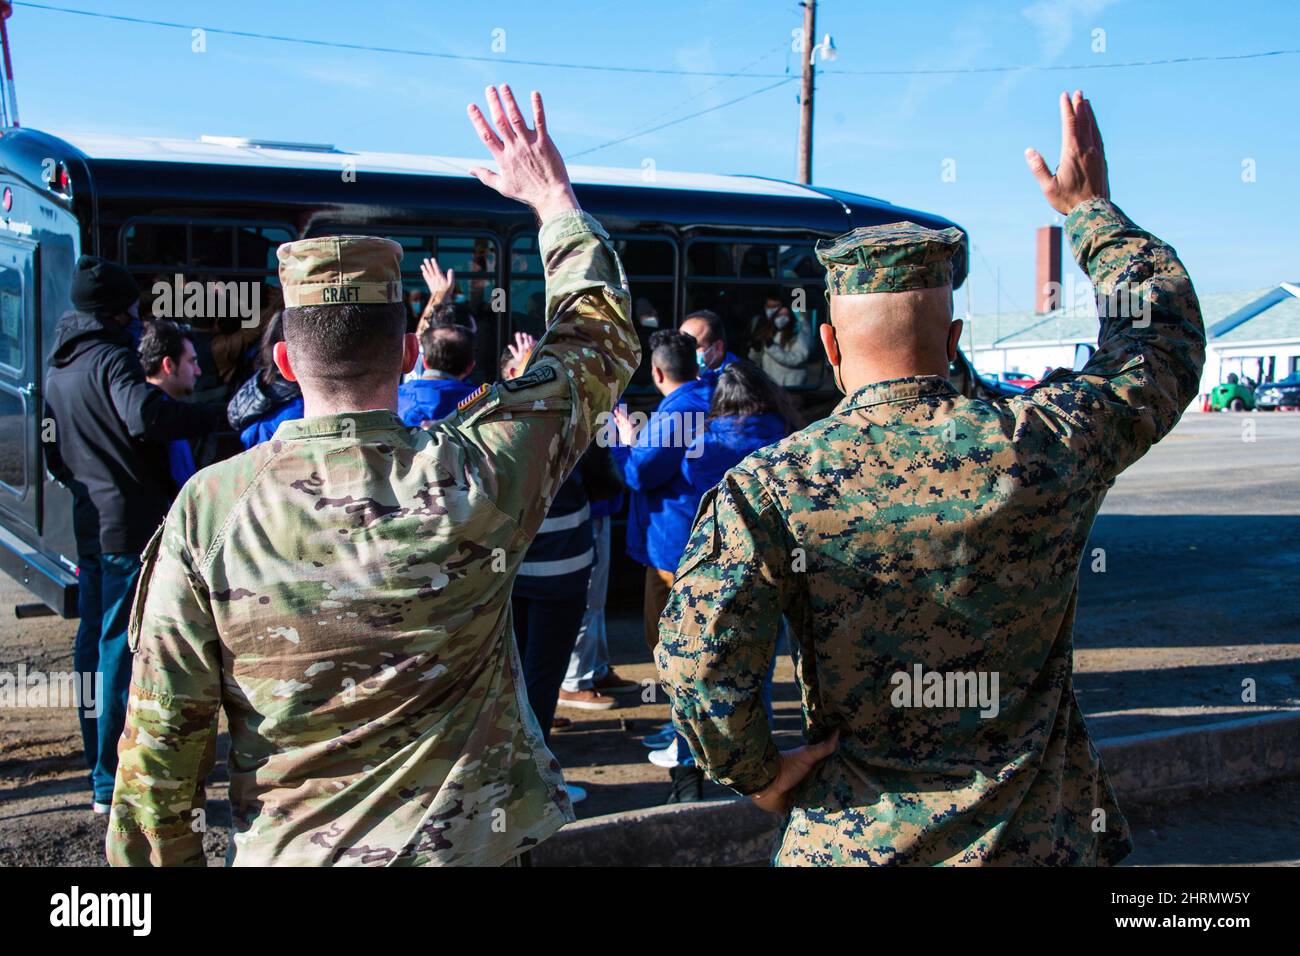 Usa. 1st Feb, 2022. U.S. Army Brig. Gen. Paul Craft, Commanding General of Task Force Pickett, and Col. Quintin Jones, Commanding Officer of 23rd Marine Regiment, wave goodbye to Afghan evacuees departing Safe Haven Pickett. This group of evacuees are the final to leave the safe haven and are settling in various communities across the USA. The Department of Defense, through U.S. Northern Command, and in support of the Department of Homeland Security, is providing transportation, temporary housing, medical screening, and general support for at least 50,000 Afghan evacuees at suitable facil Stock Photo